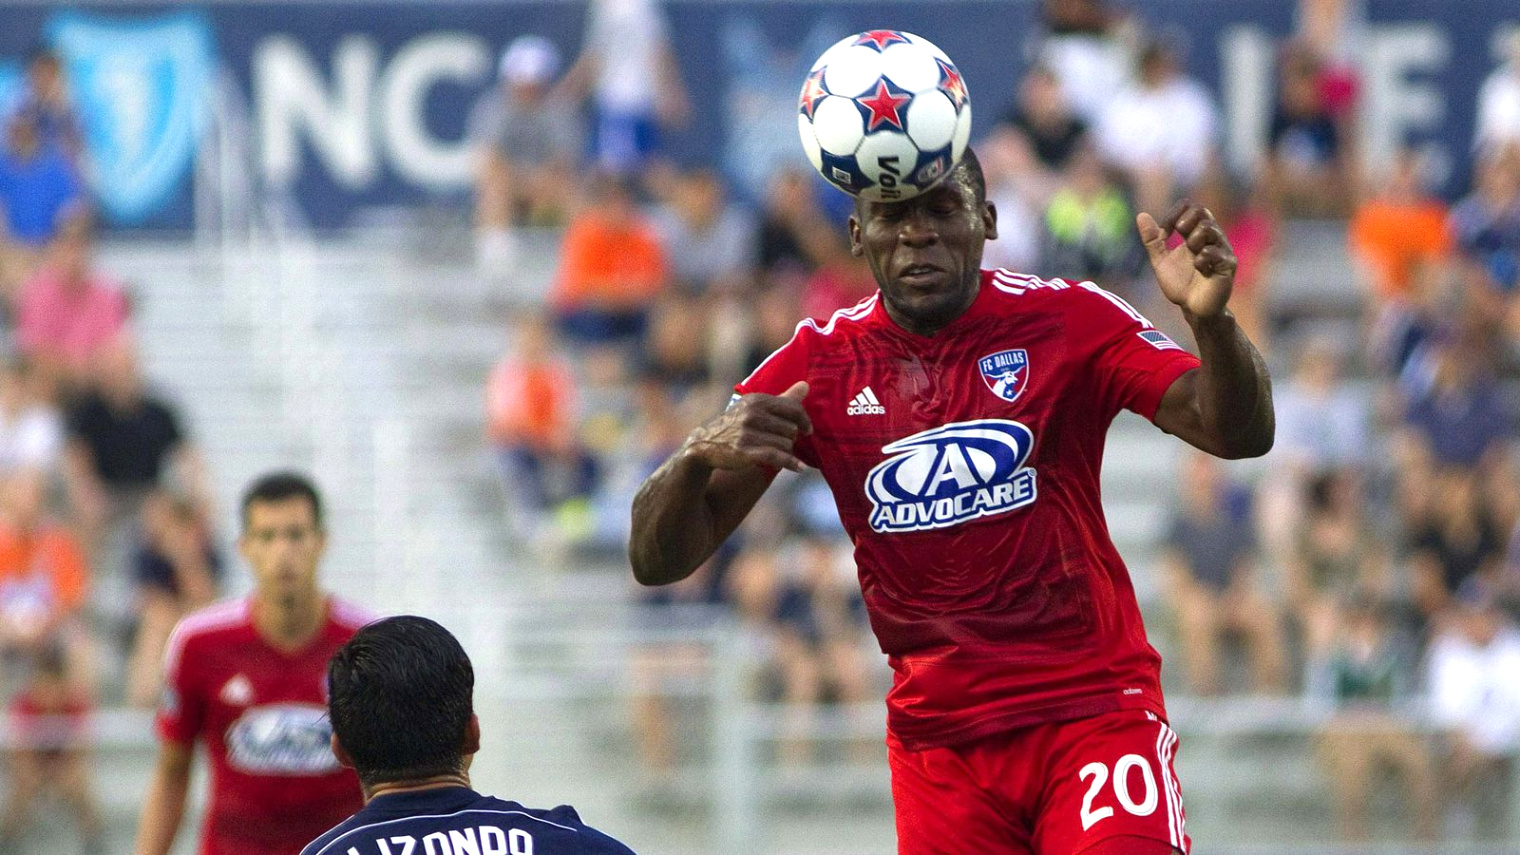 Personil Injury Lawyer In Hendry Fl Dans Fc Dallas Injury Update Hendry Thomas Out with Acl Tear Big D soccer